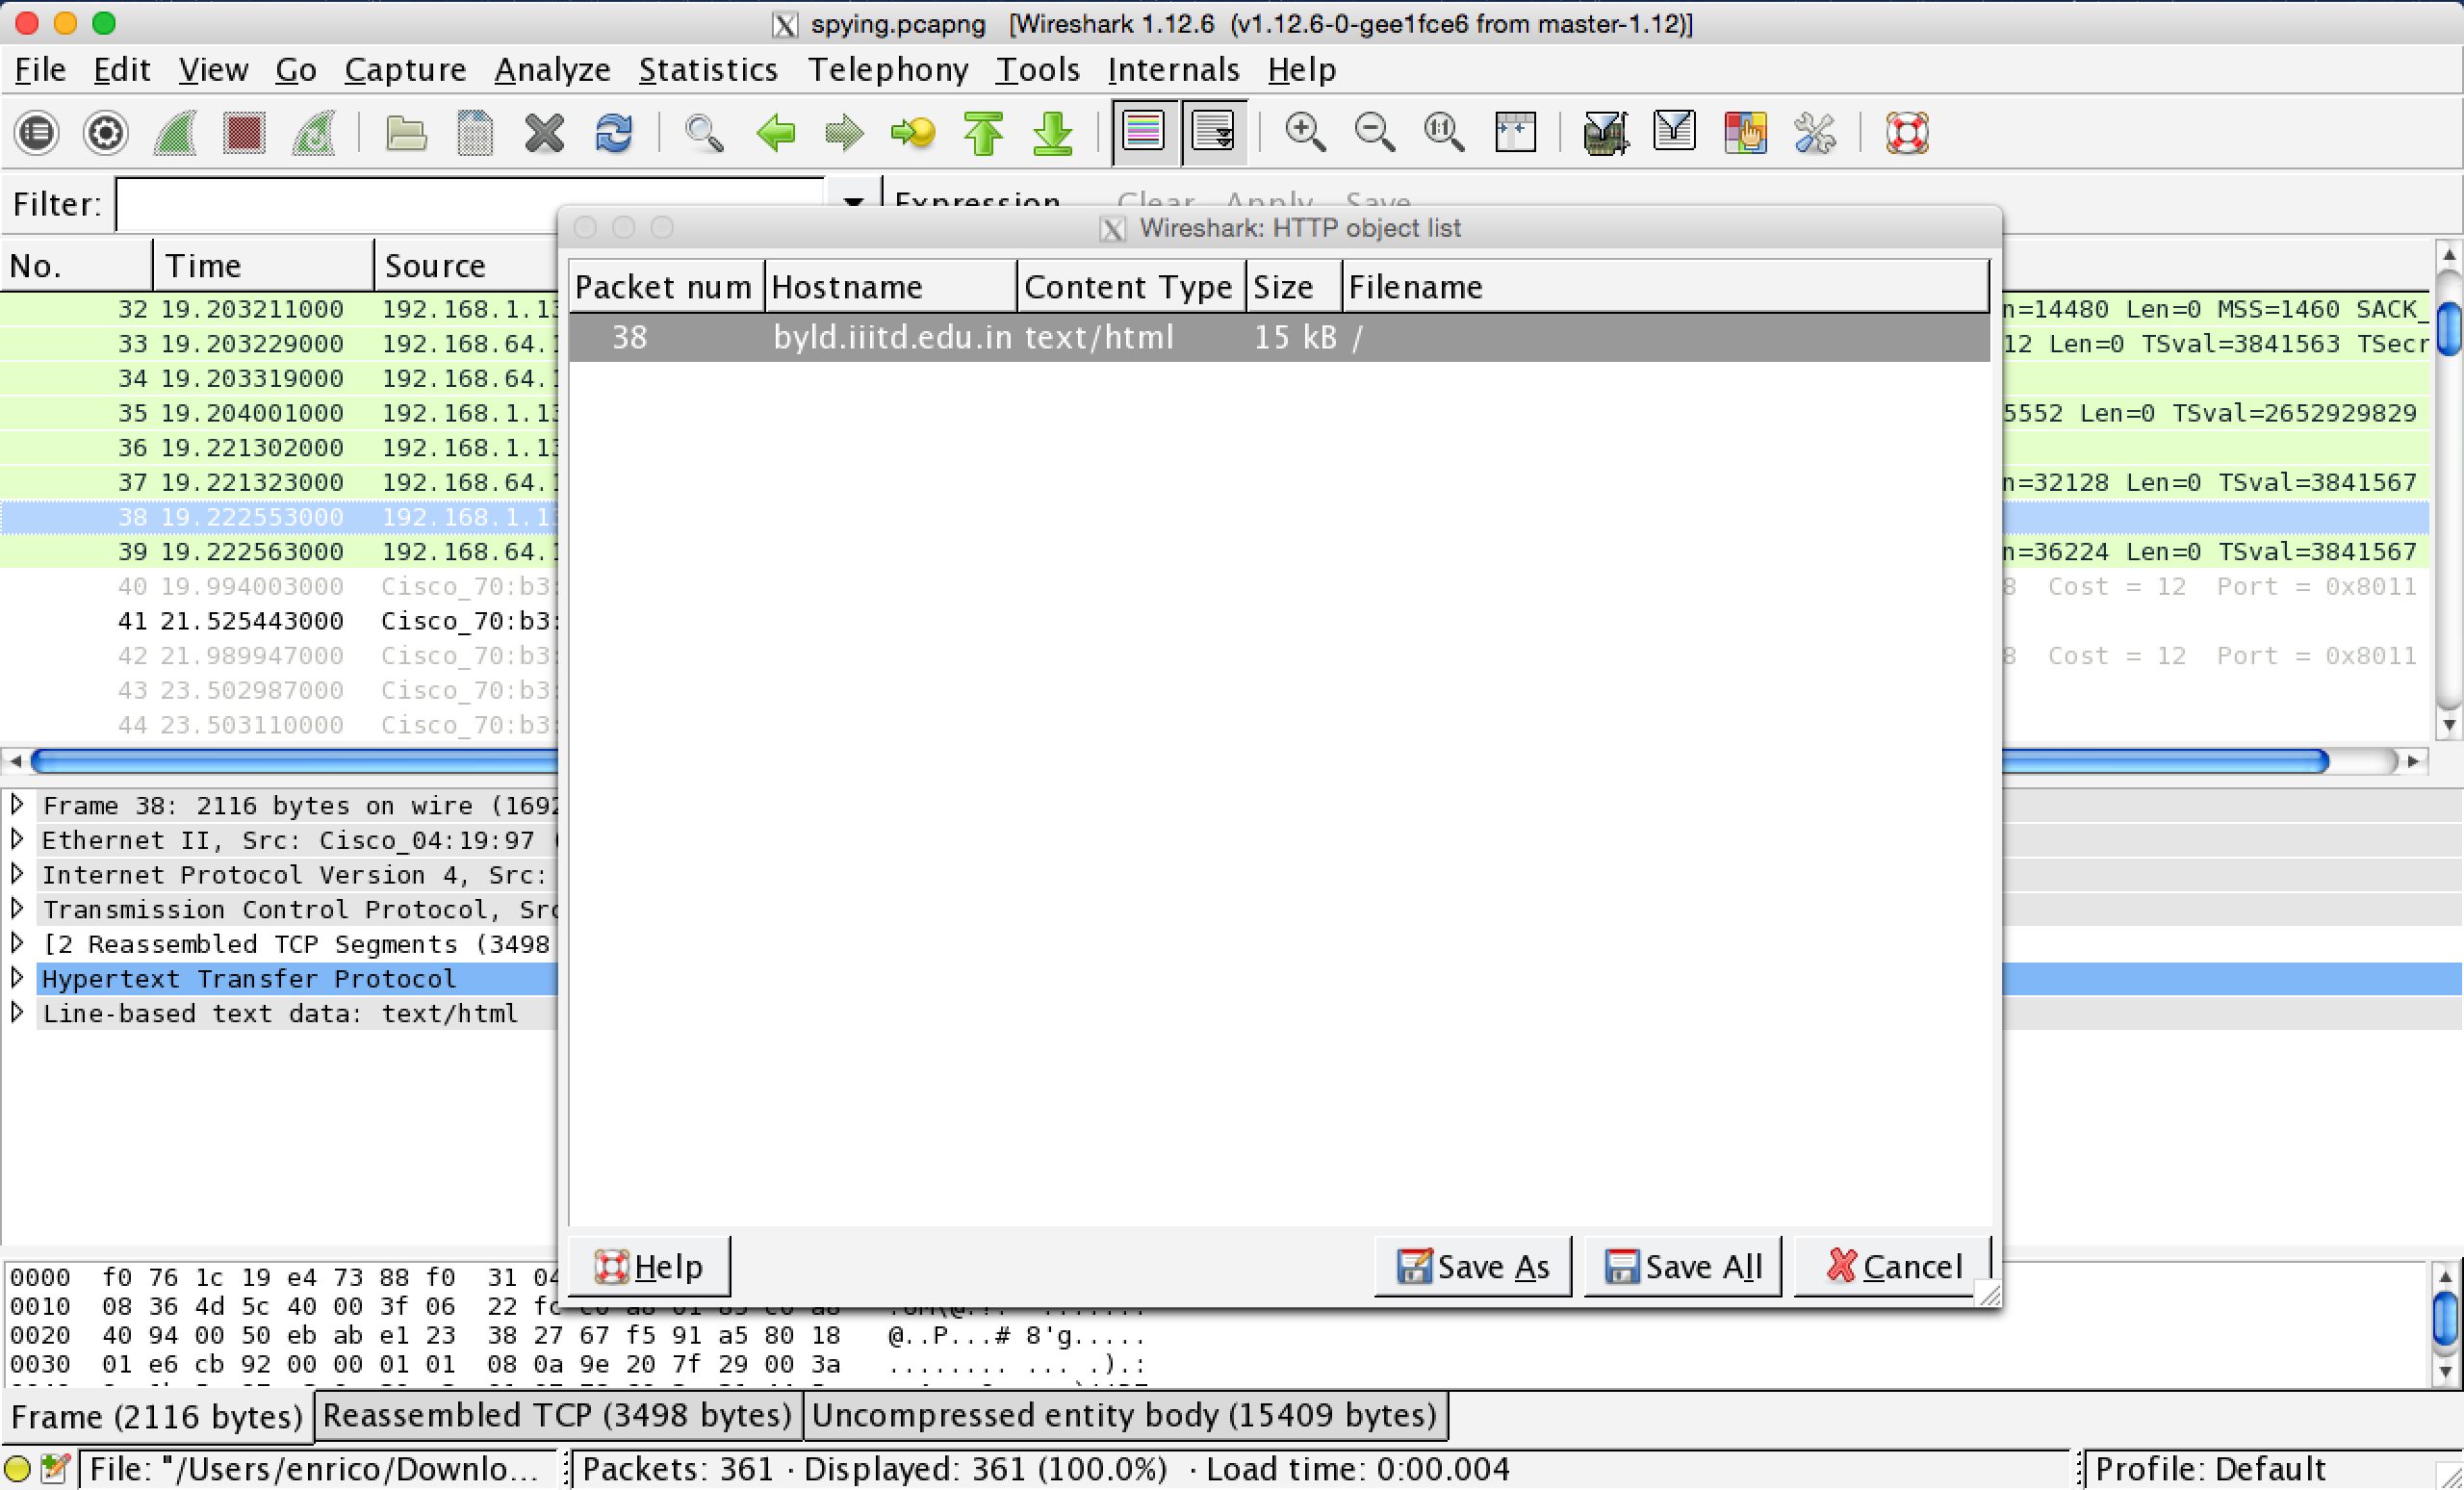 http objects extraction from Wireshark